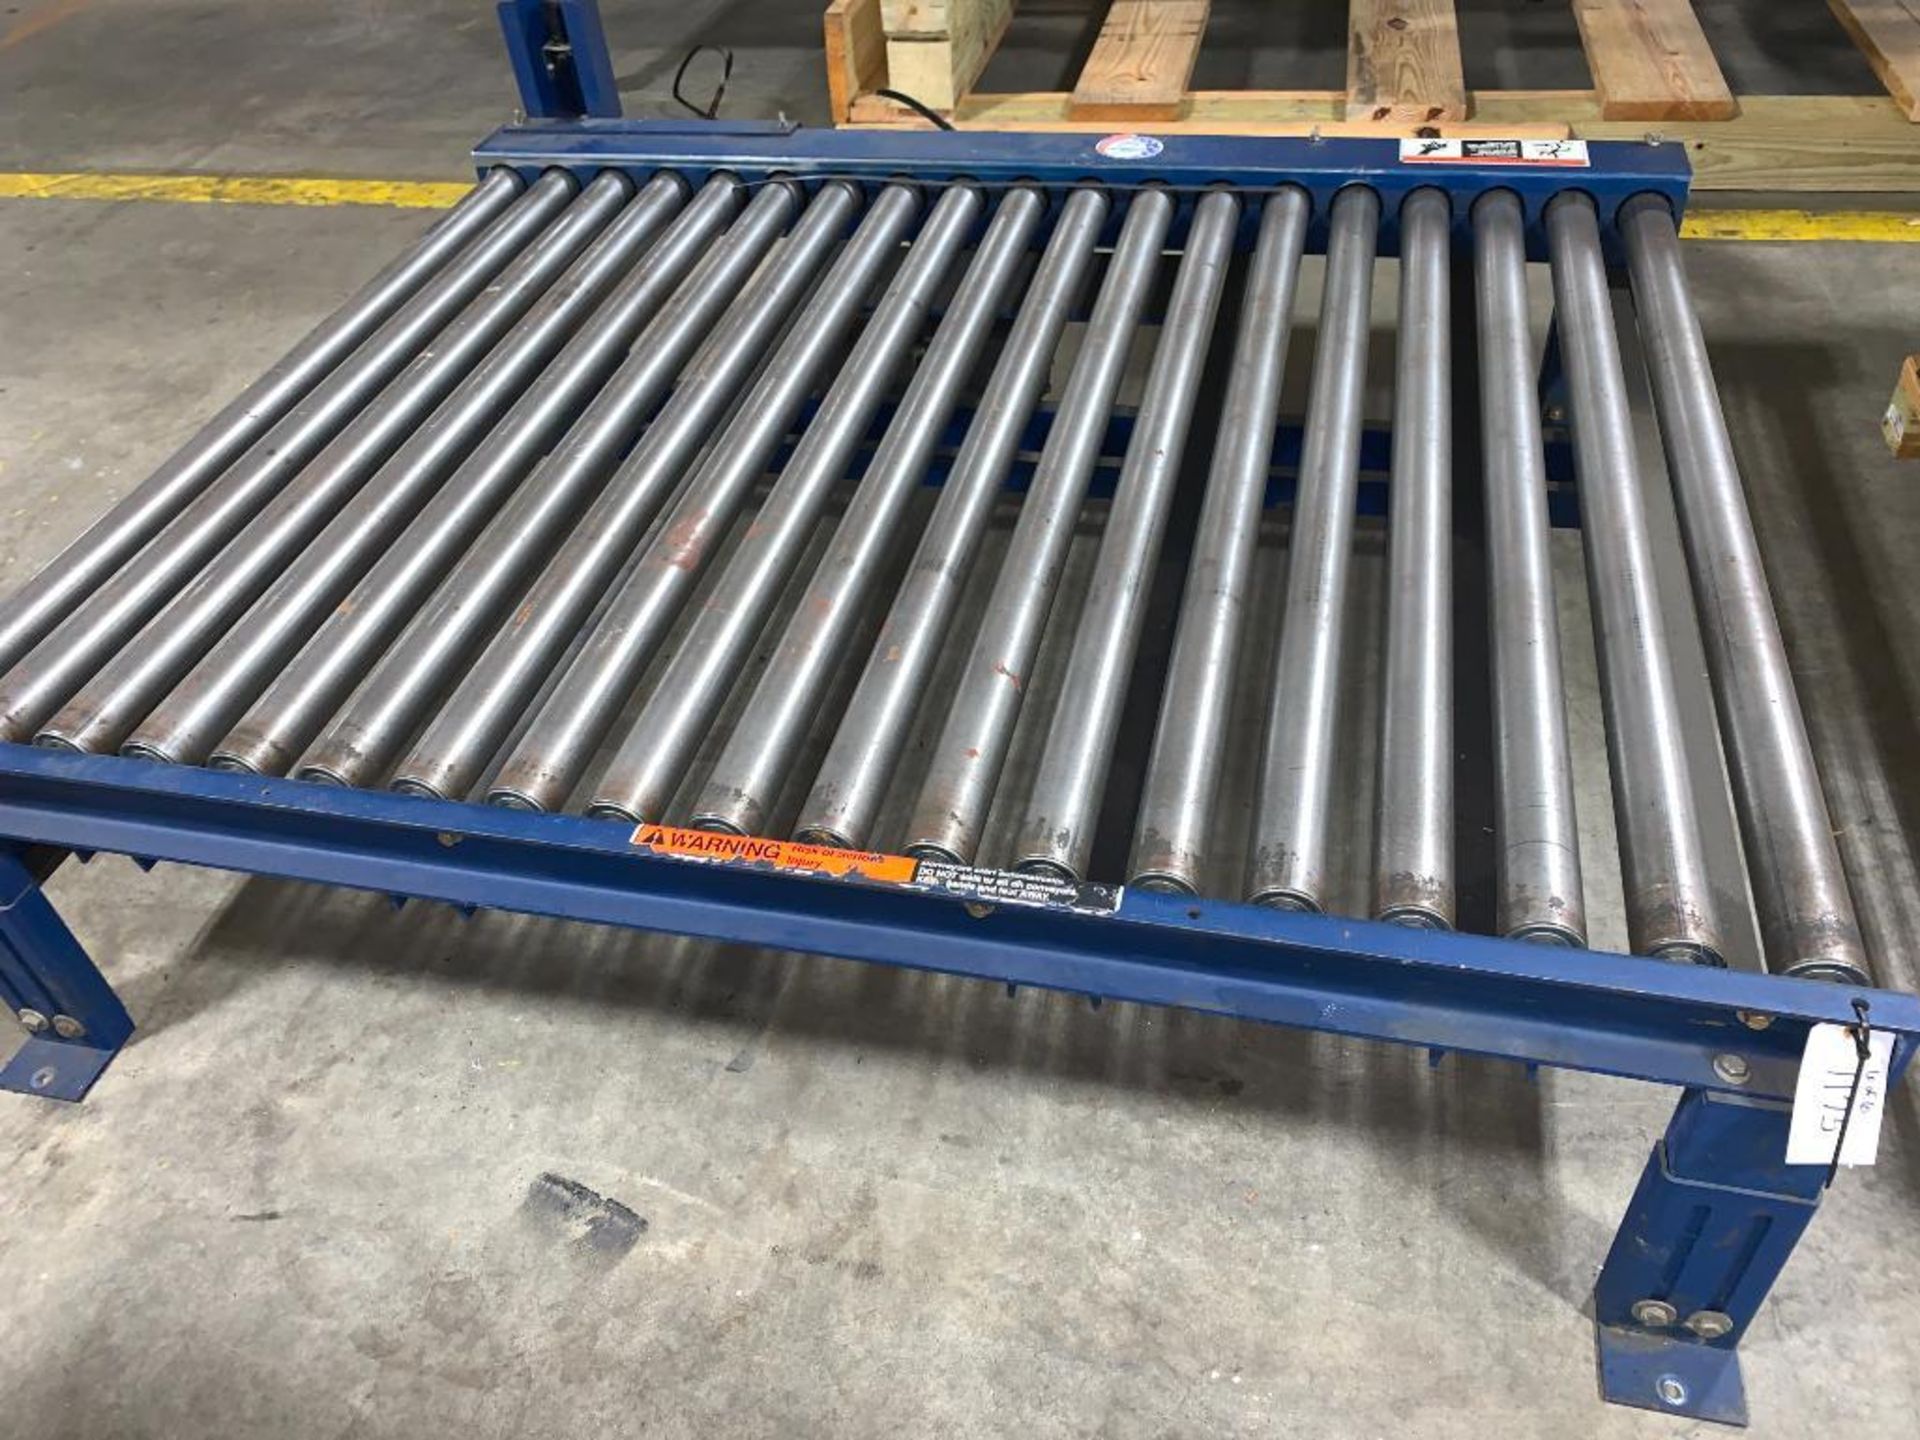 (6) skids of Lantech full pallet conveyor including turntable section - Located in Tifton, GA - Image 19 of 19